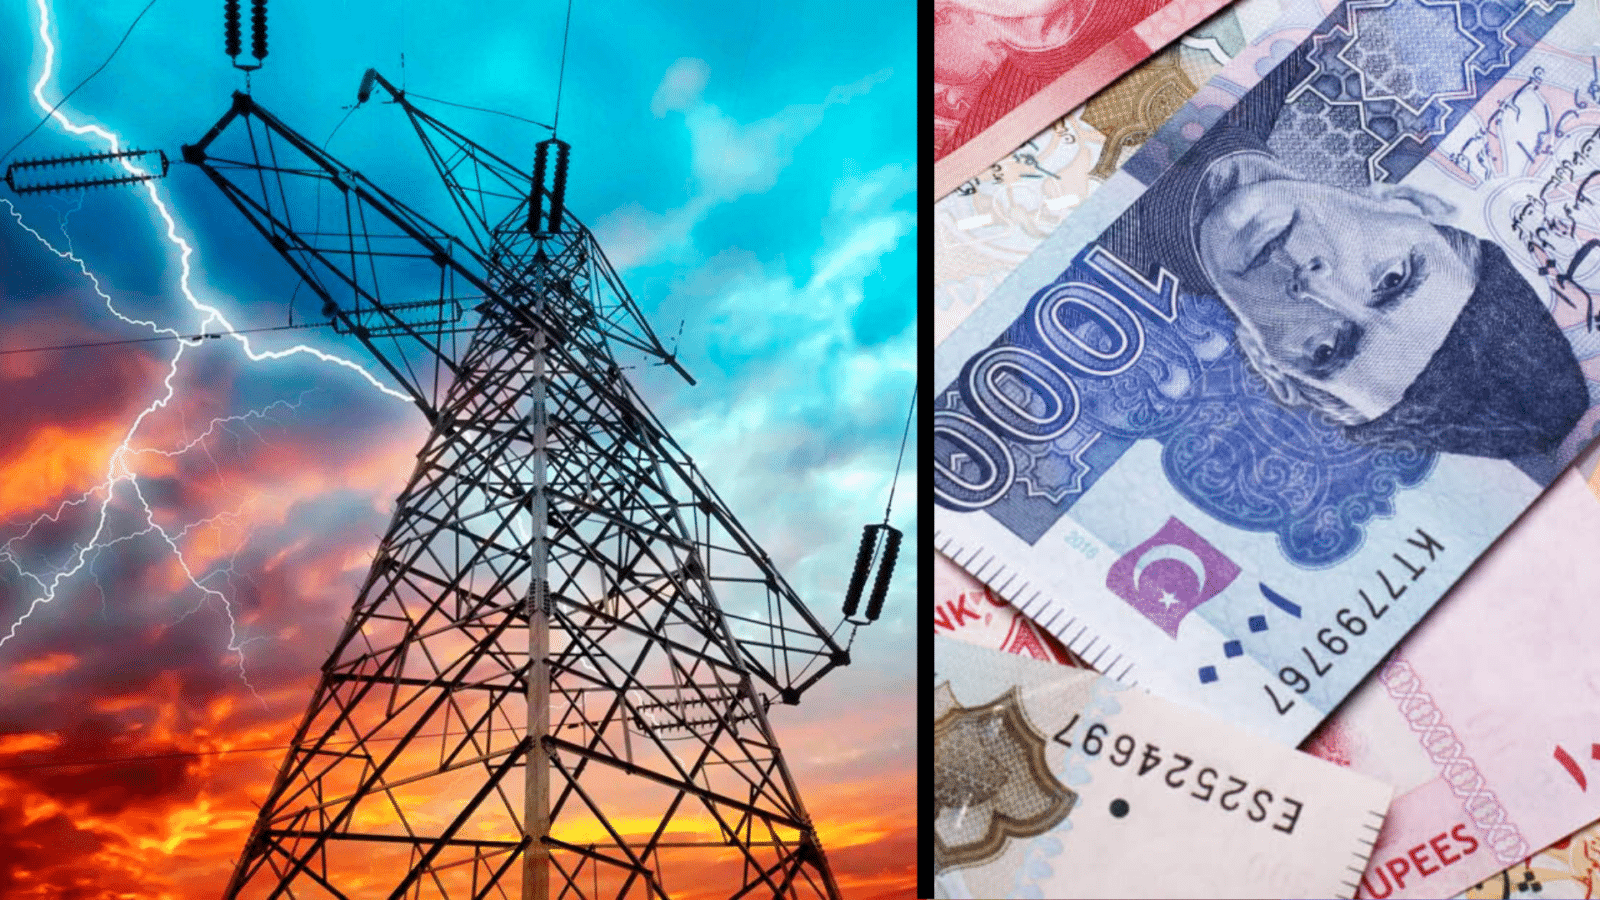 Audit Reveals Rs. 2960 Billion Irregularities in Ministry of Power